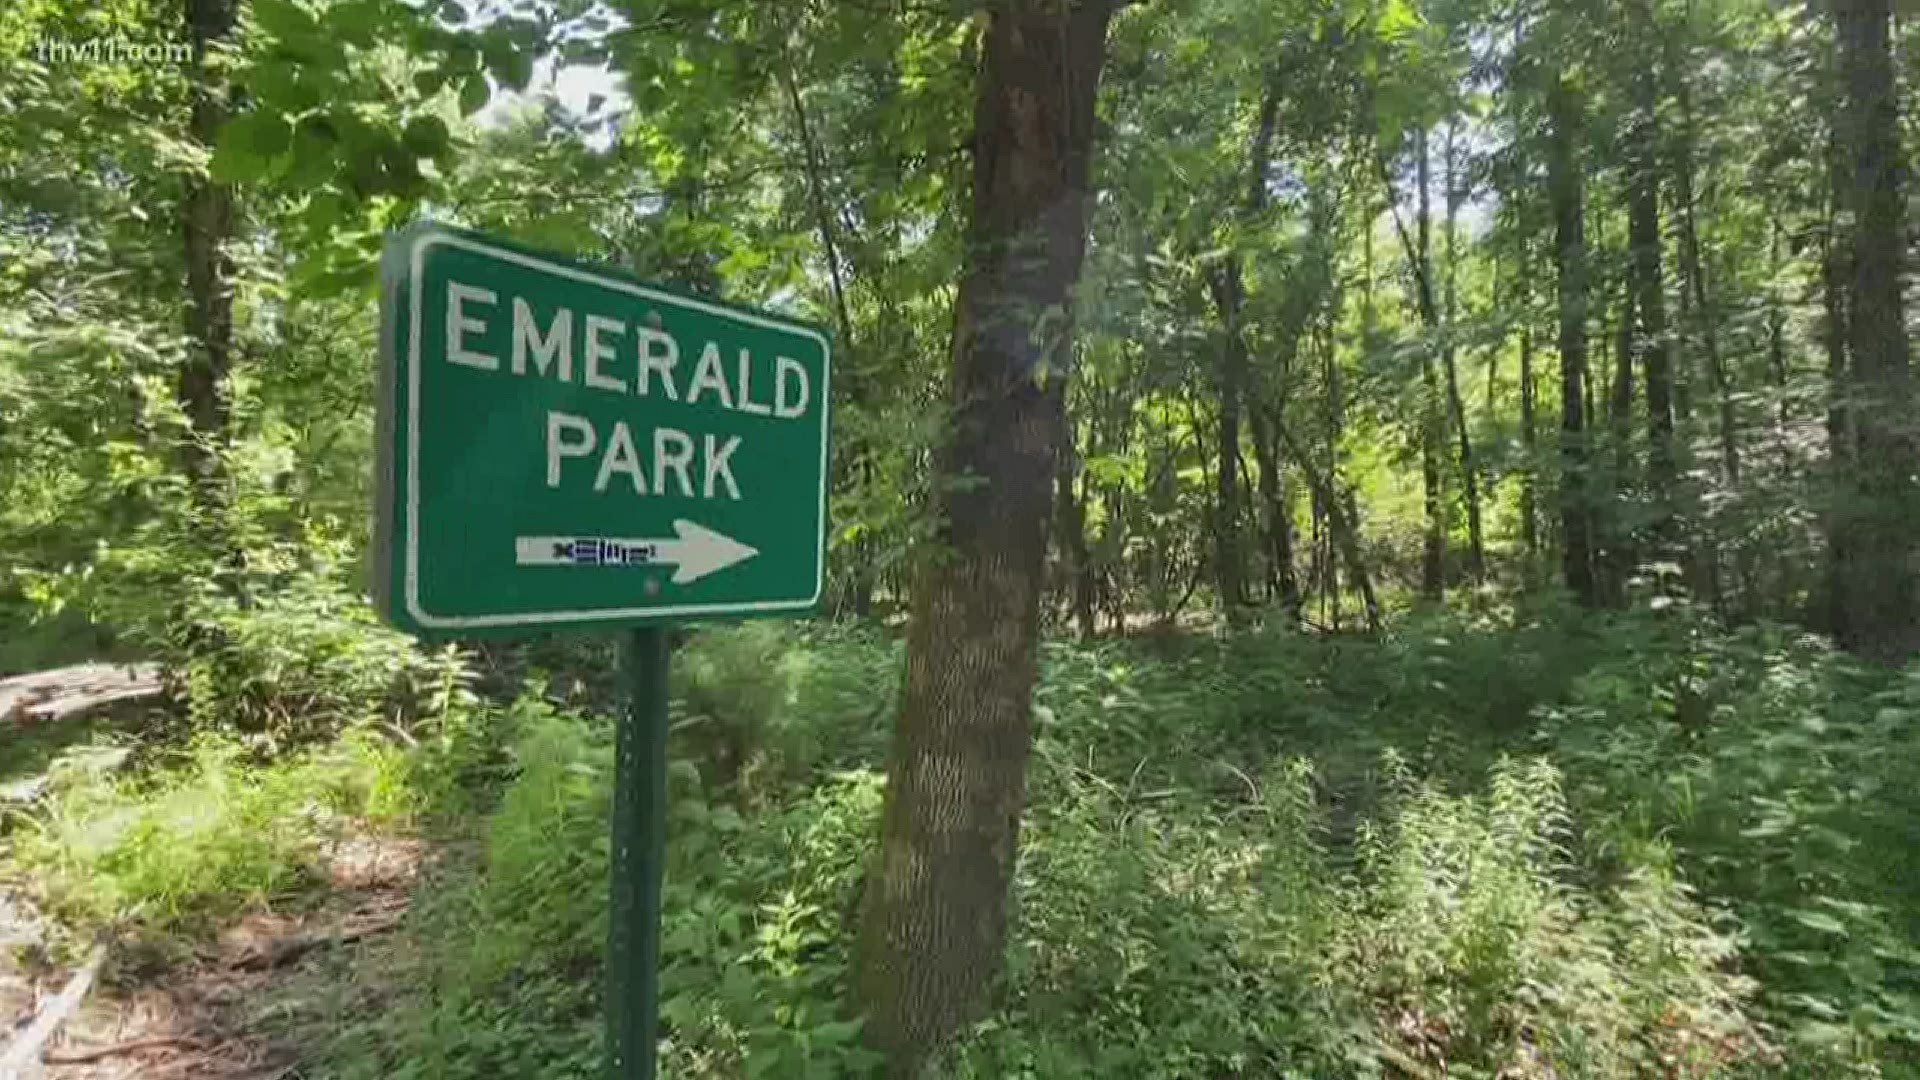 This week we are checking out some beautiful views and great trails you can find in North Little Rock. Ashley King takes us to Emerald Park to Discover Arkansas.